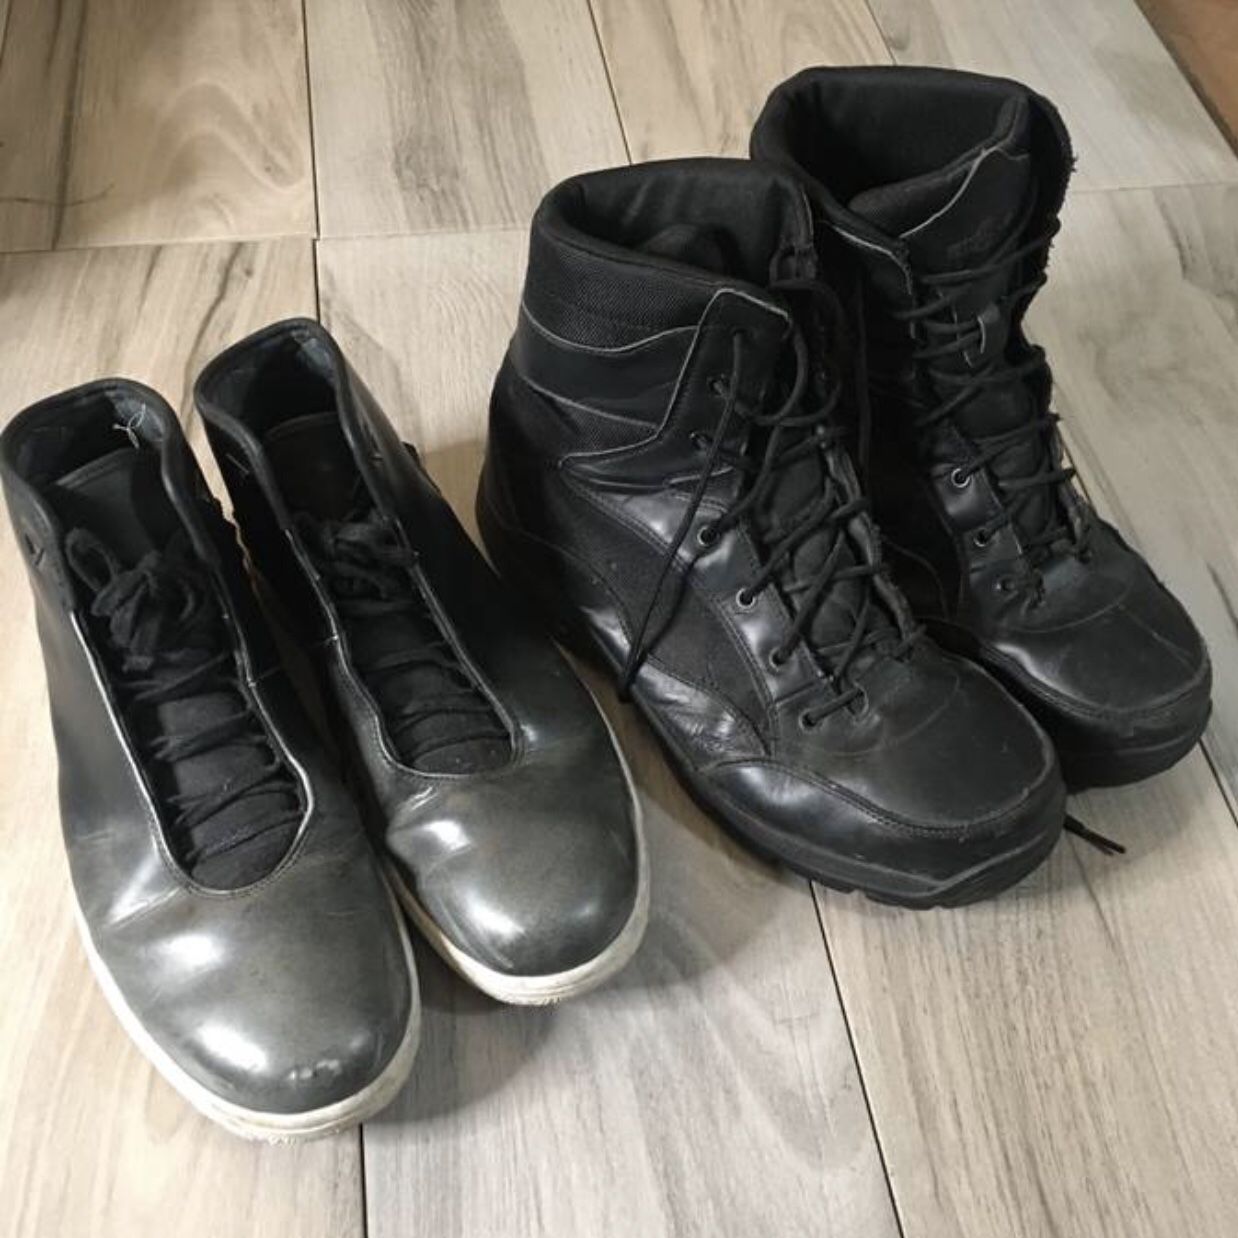 Size 13 Work Boots 2 pairs